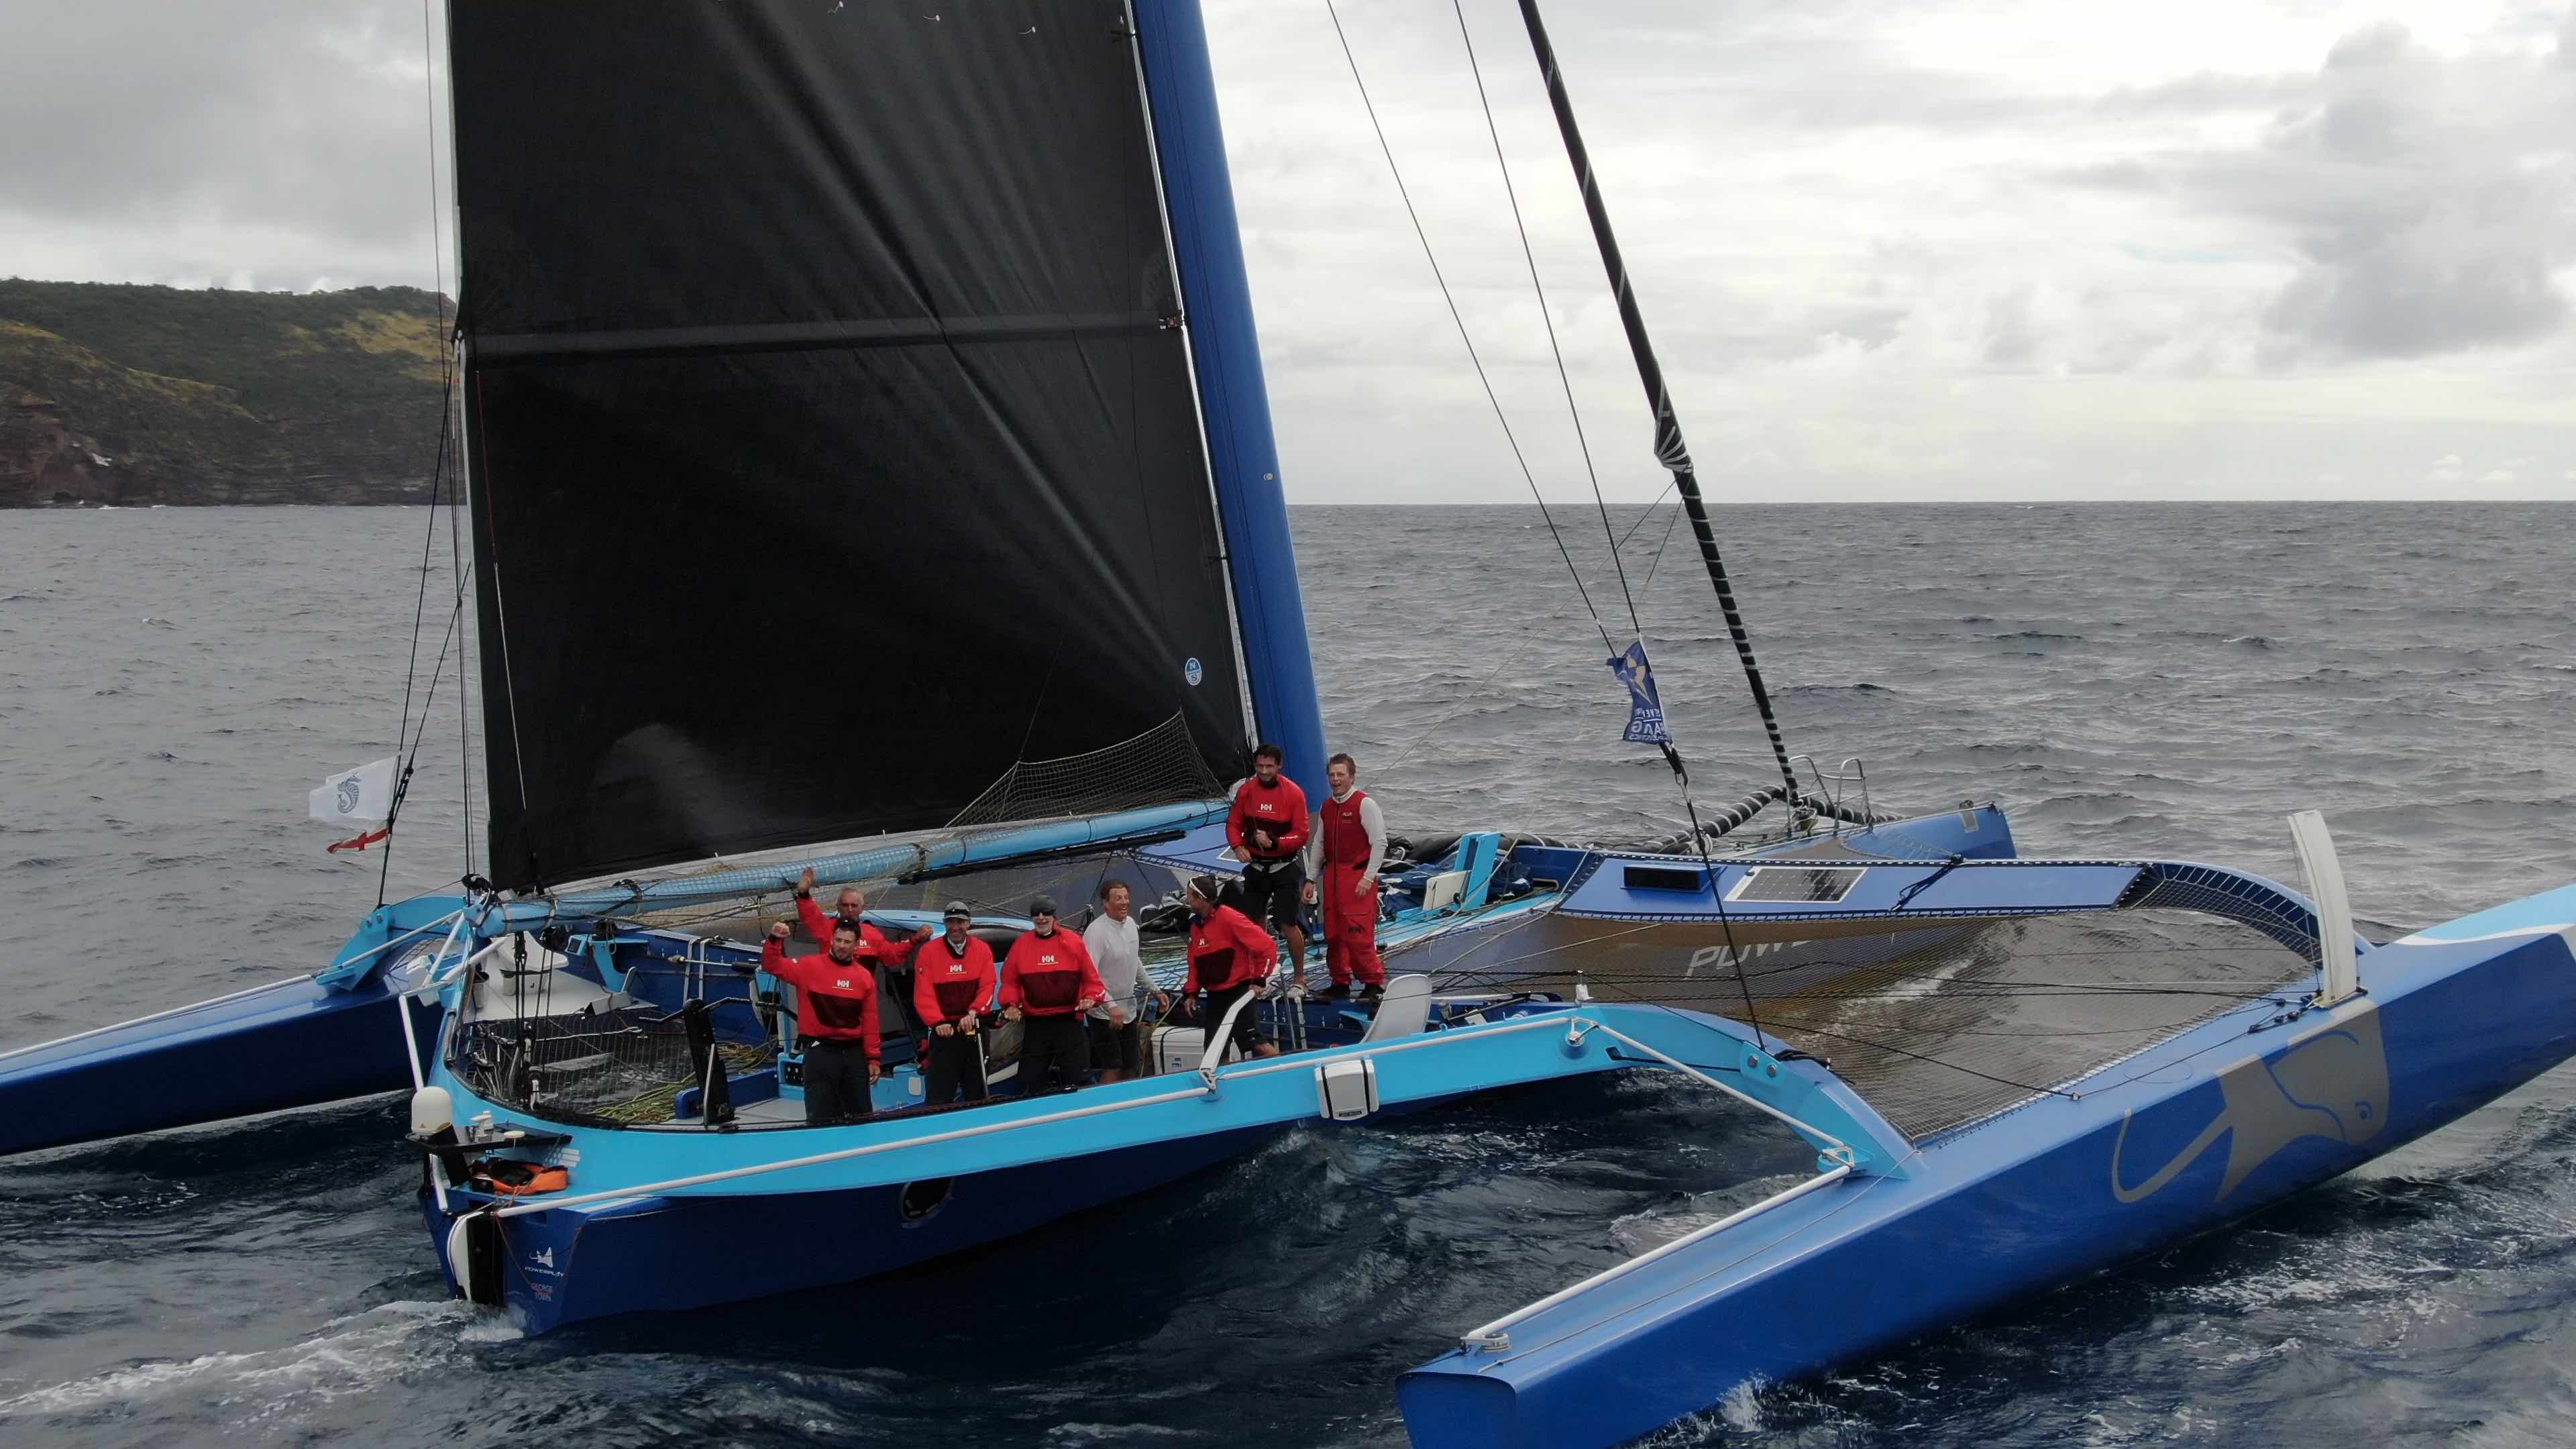 Peter Cunningham's MOD70 arrives in Antigua and the team celebrate their close victory in the MOCRA class after completing the course in 1 day 21 hrs 51 mins 34 secs © RORC